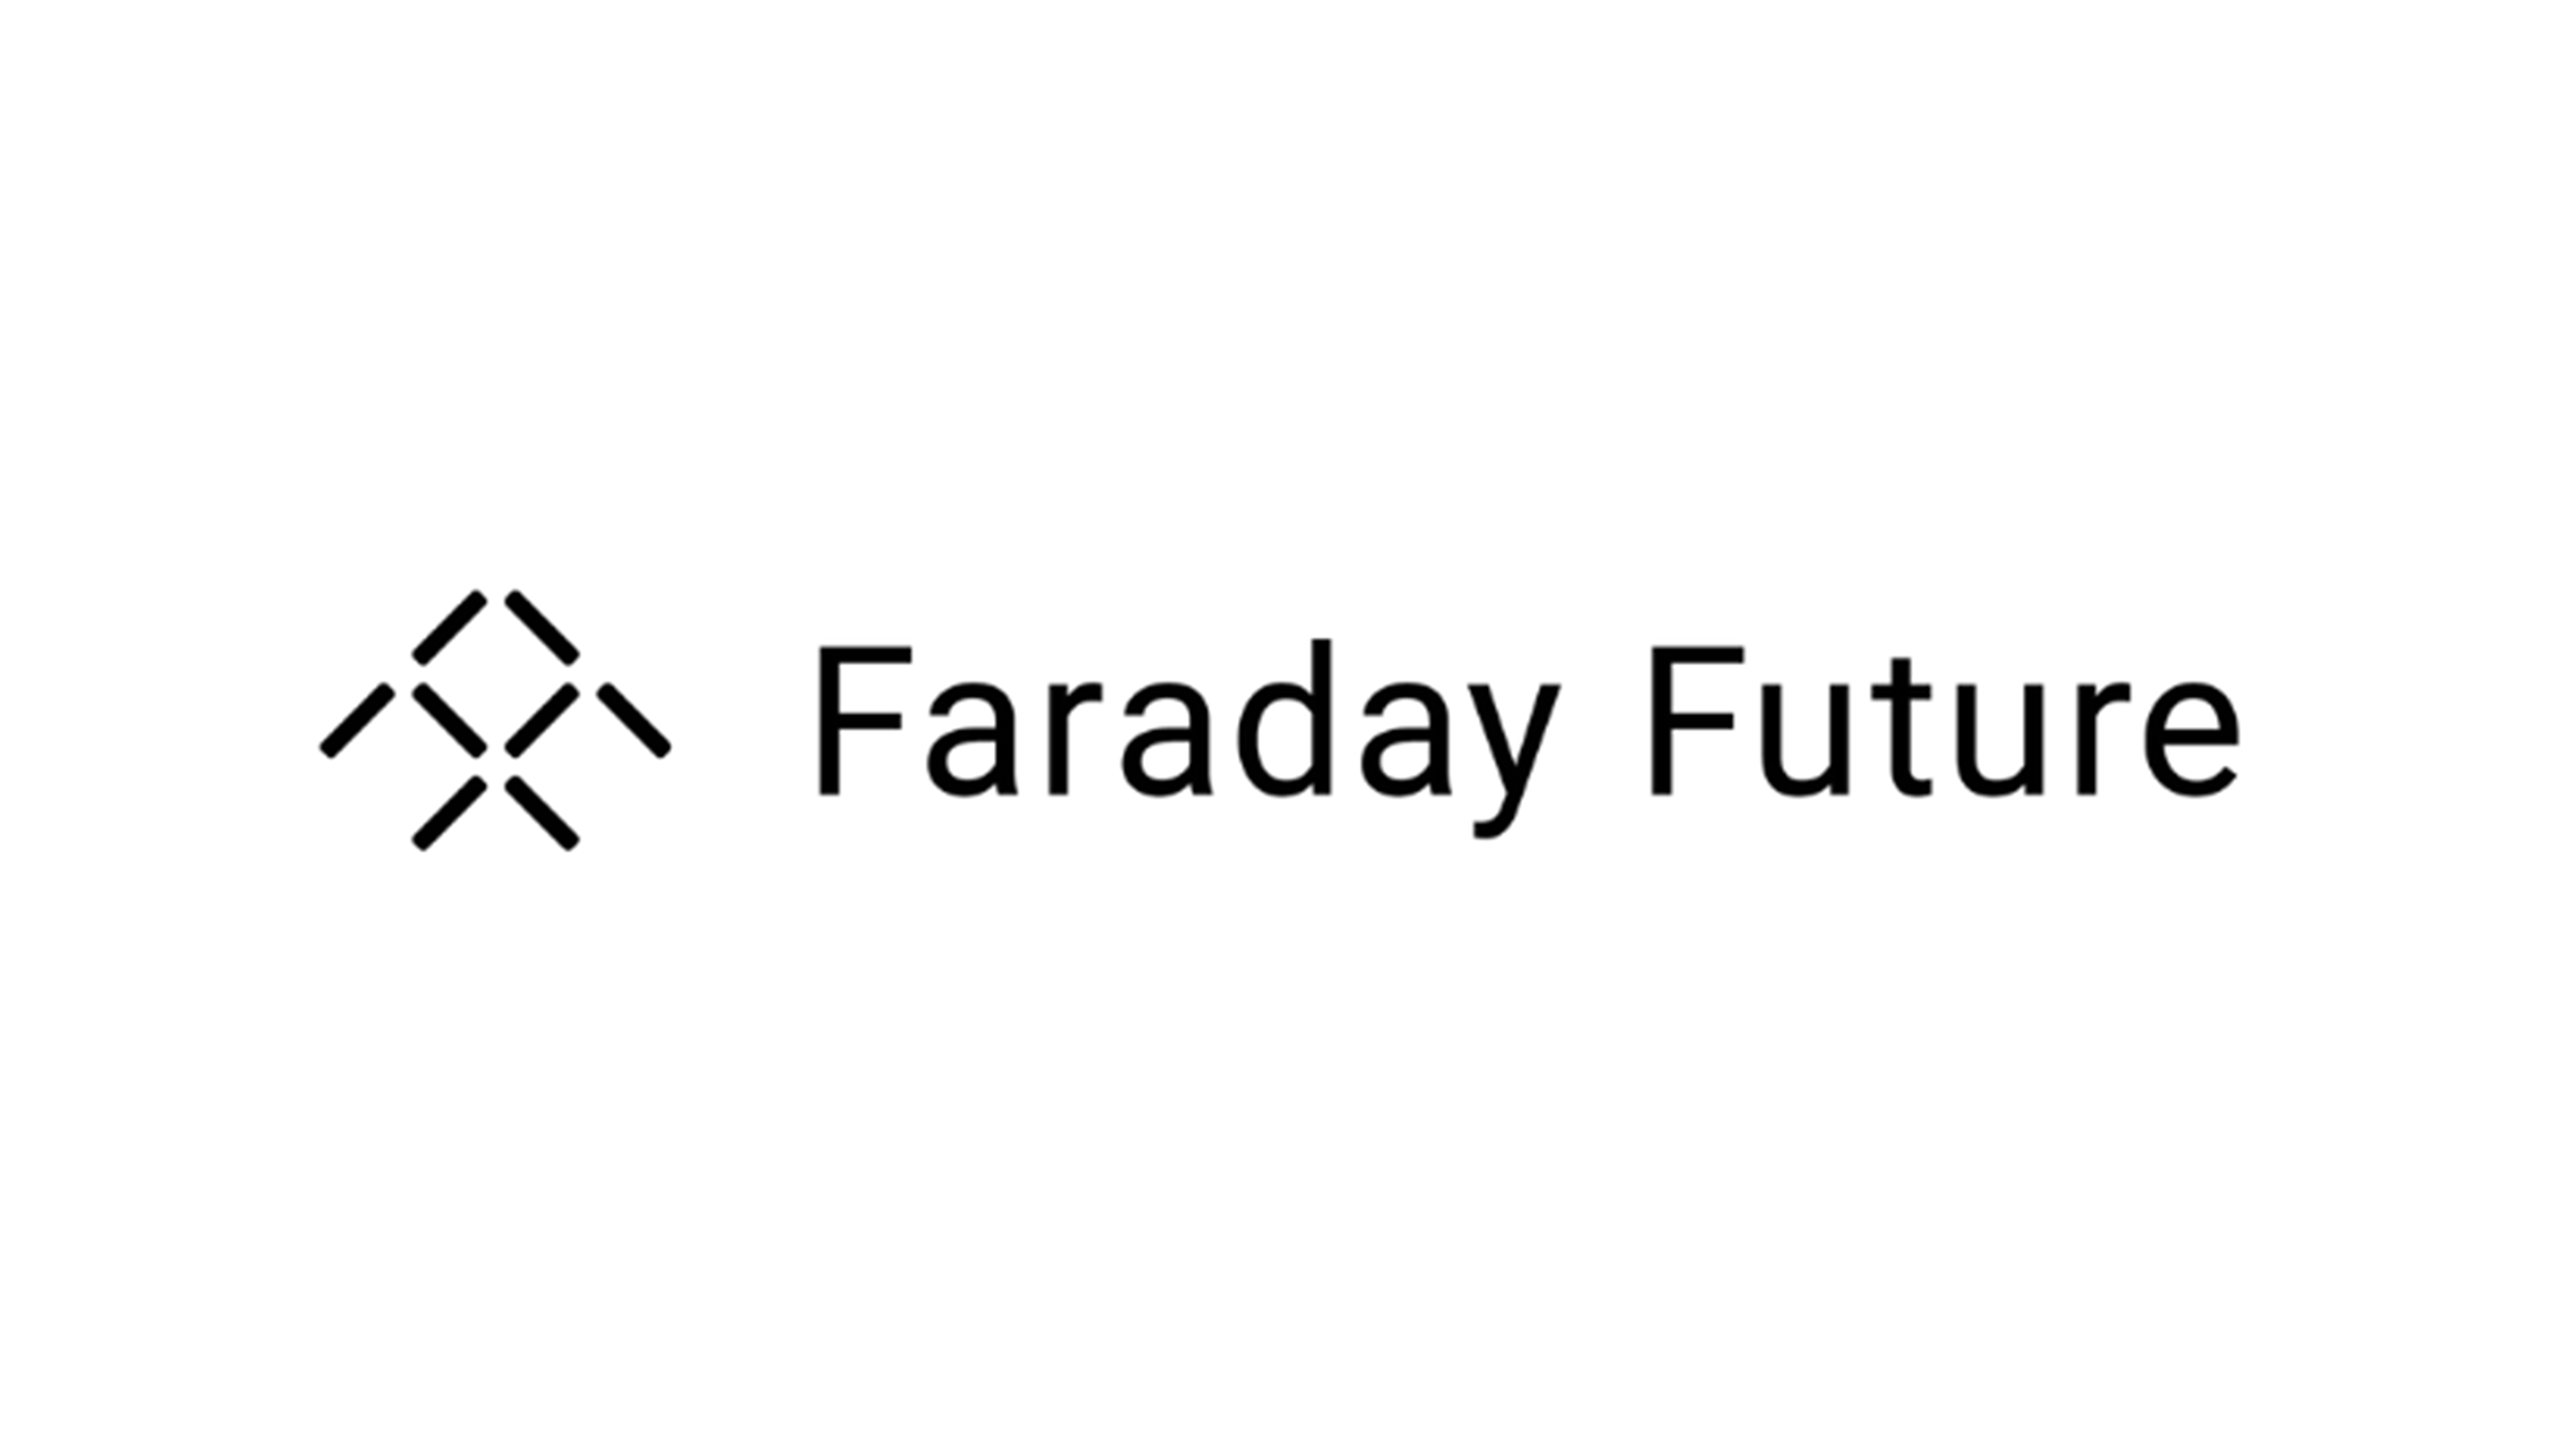 Faraday Future Stock Suspended After 5,240% Surge in 4 Days